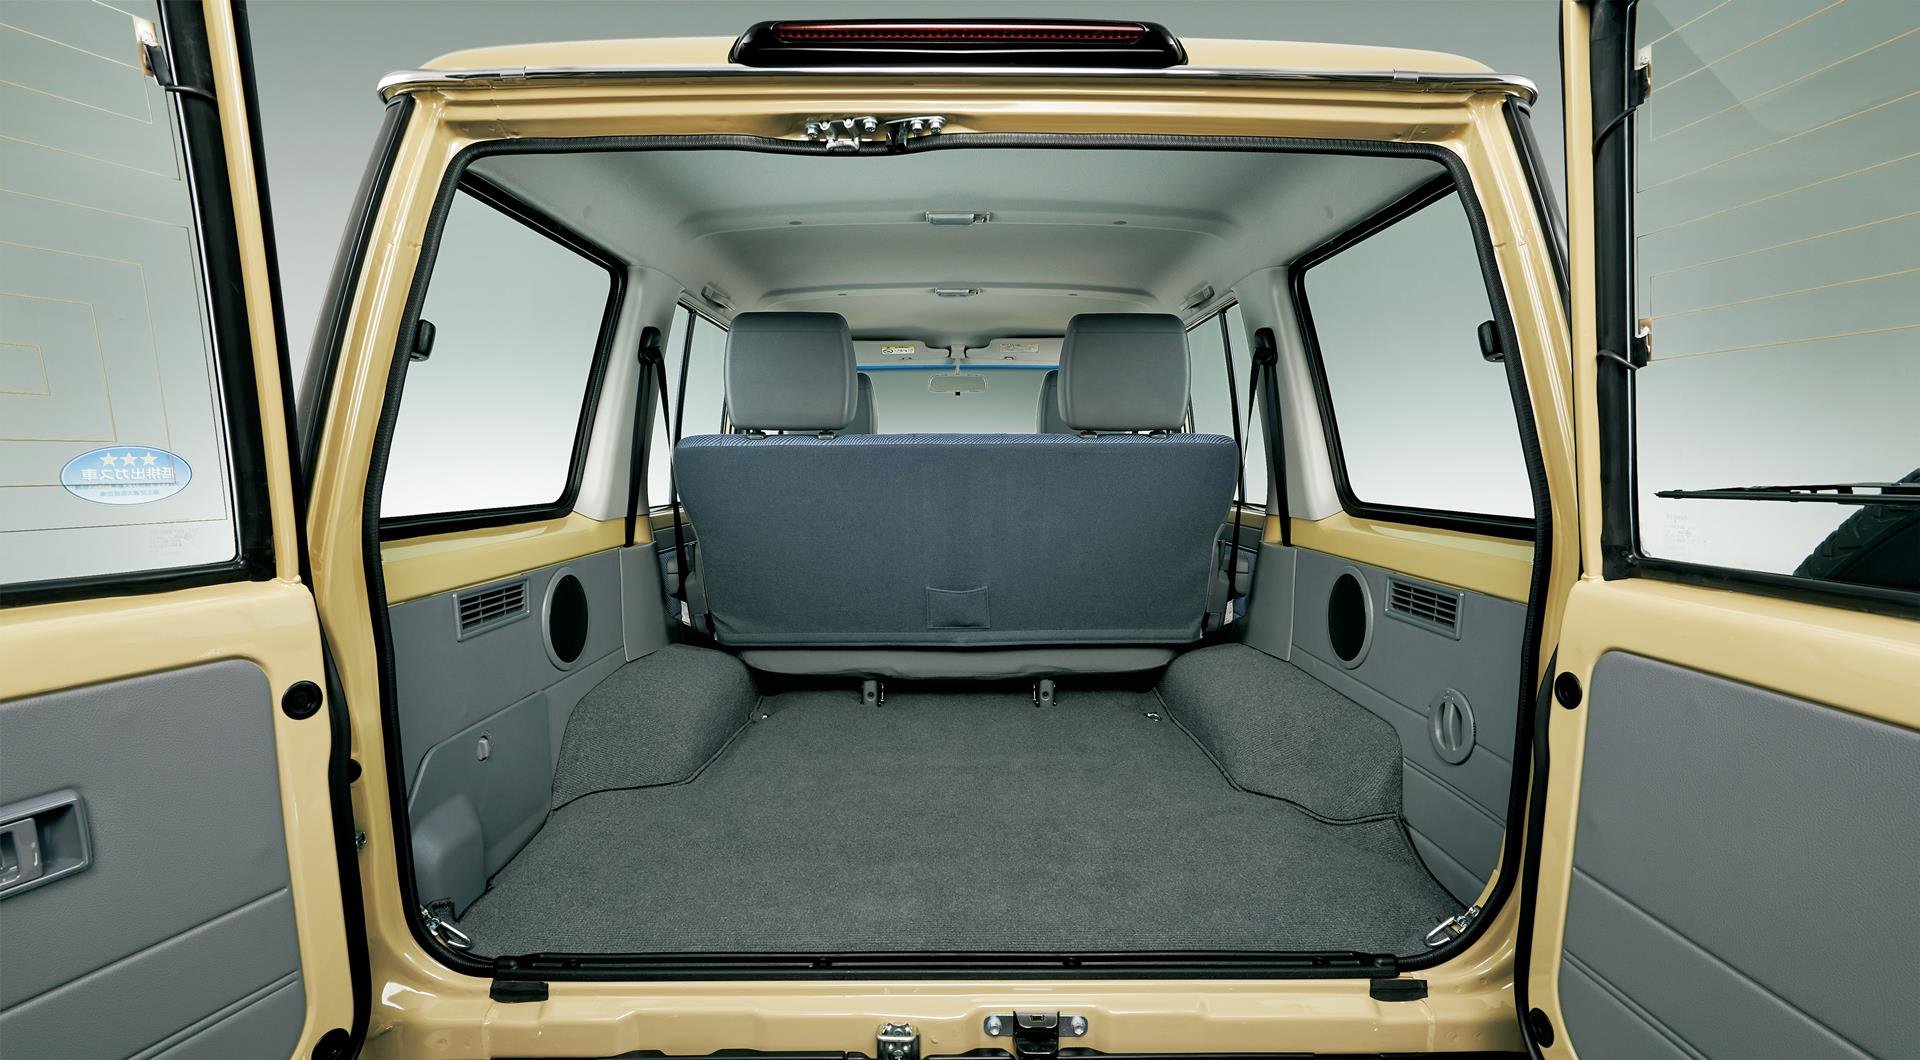 Land Cruiser 70 van cargo space with rear bench seats in use (Japan commemorative re-release)